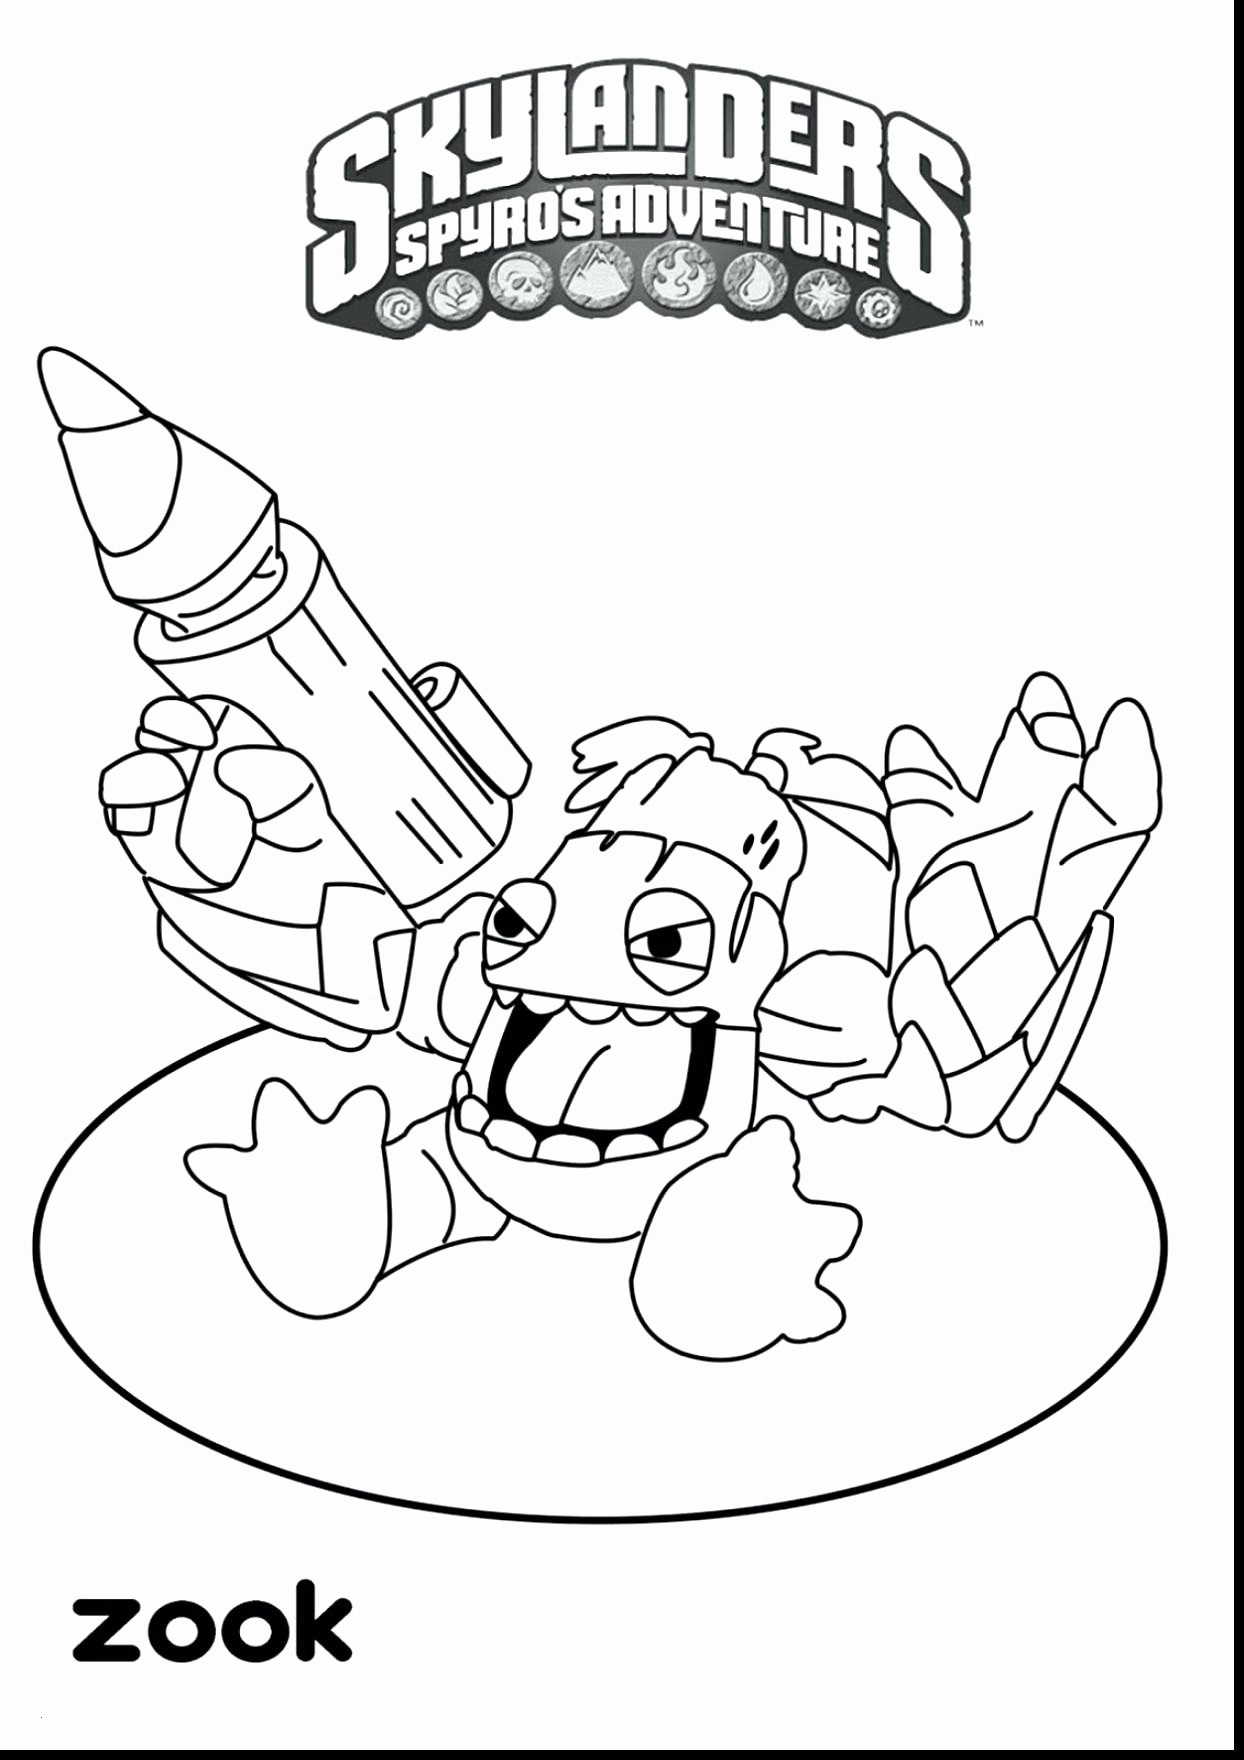 Human Skeleton Coloring Pages Coloring Pages Of Skeleton For Kids Printable Coloring Page For Kids